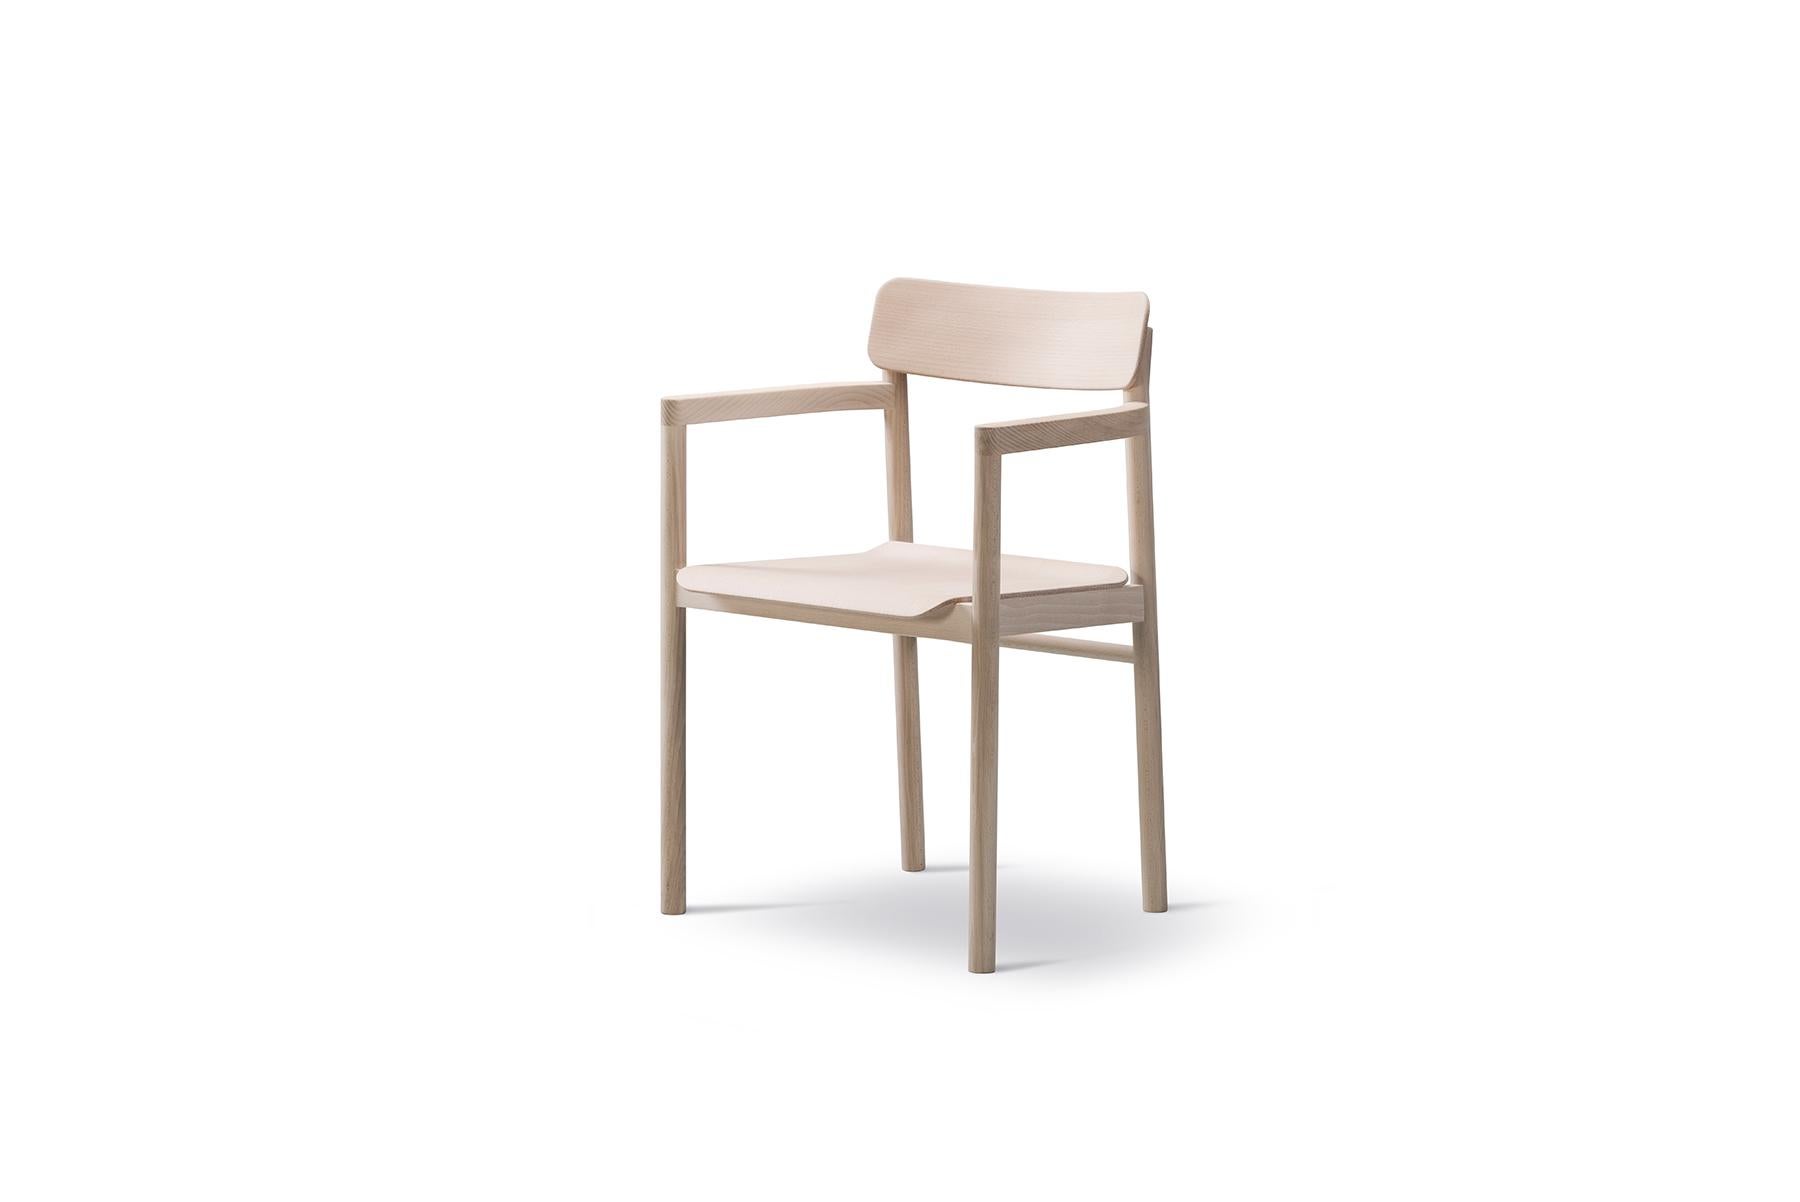 With its upright stance and solid wood frame, the Cecilie Manz Post Armchair embodies the principles of simplicity that drive designer Cecilie Manz. Cleverly constructed with a minimal use of space for the arms yet a comfortably wide seat, the Post